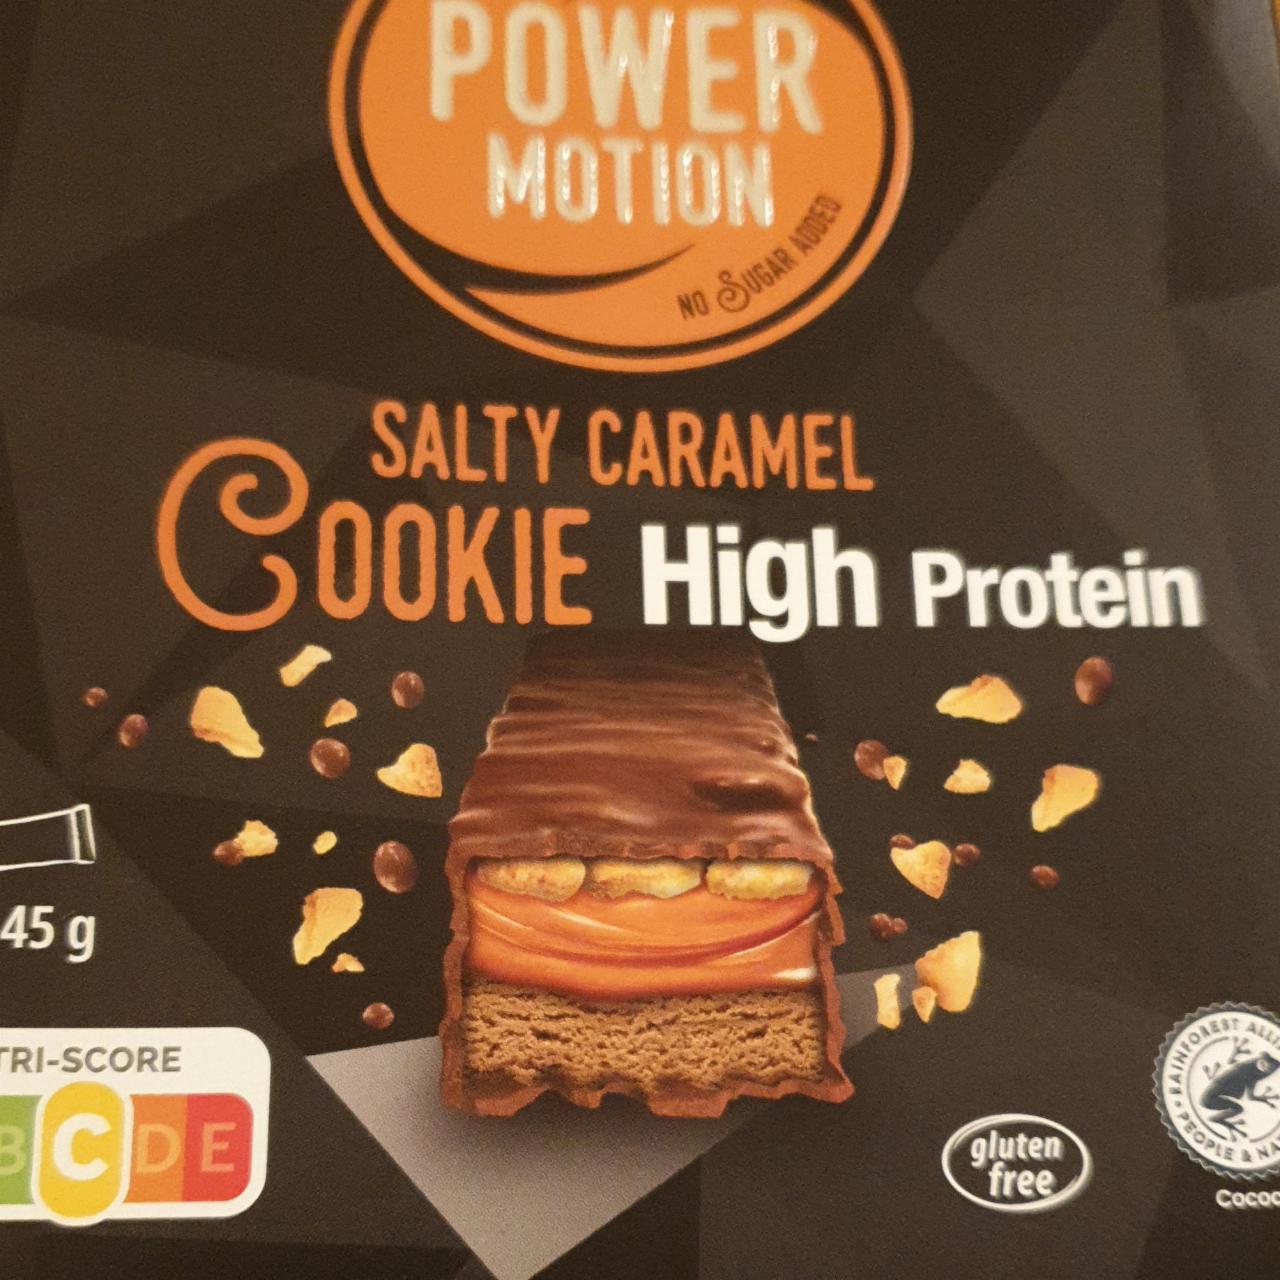 Fotografie - Power motion Salty caramel cookie high protein Frankonia